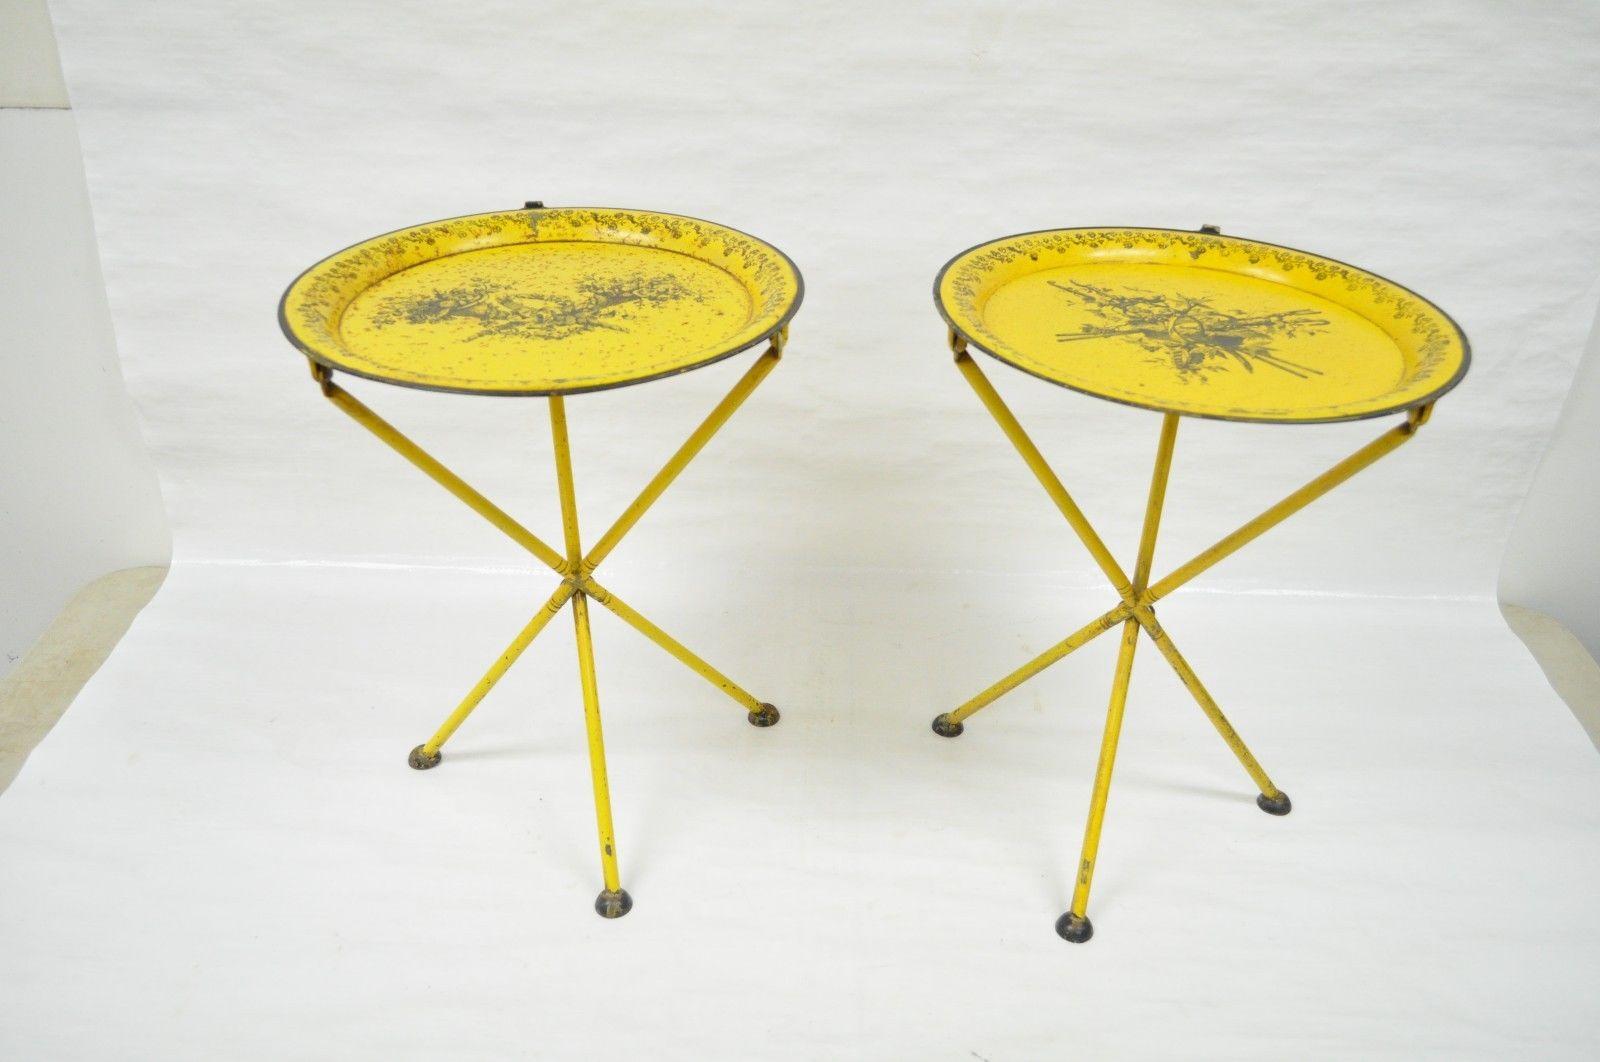 Pair of vintage Italian neoclassical style tole metal small folding side tables. Item features metal frame, folding design, harvest depictions, yellow painted finish, round drop rings (Can be used to hang on a wall), marked, Italy, circa 1950s,